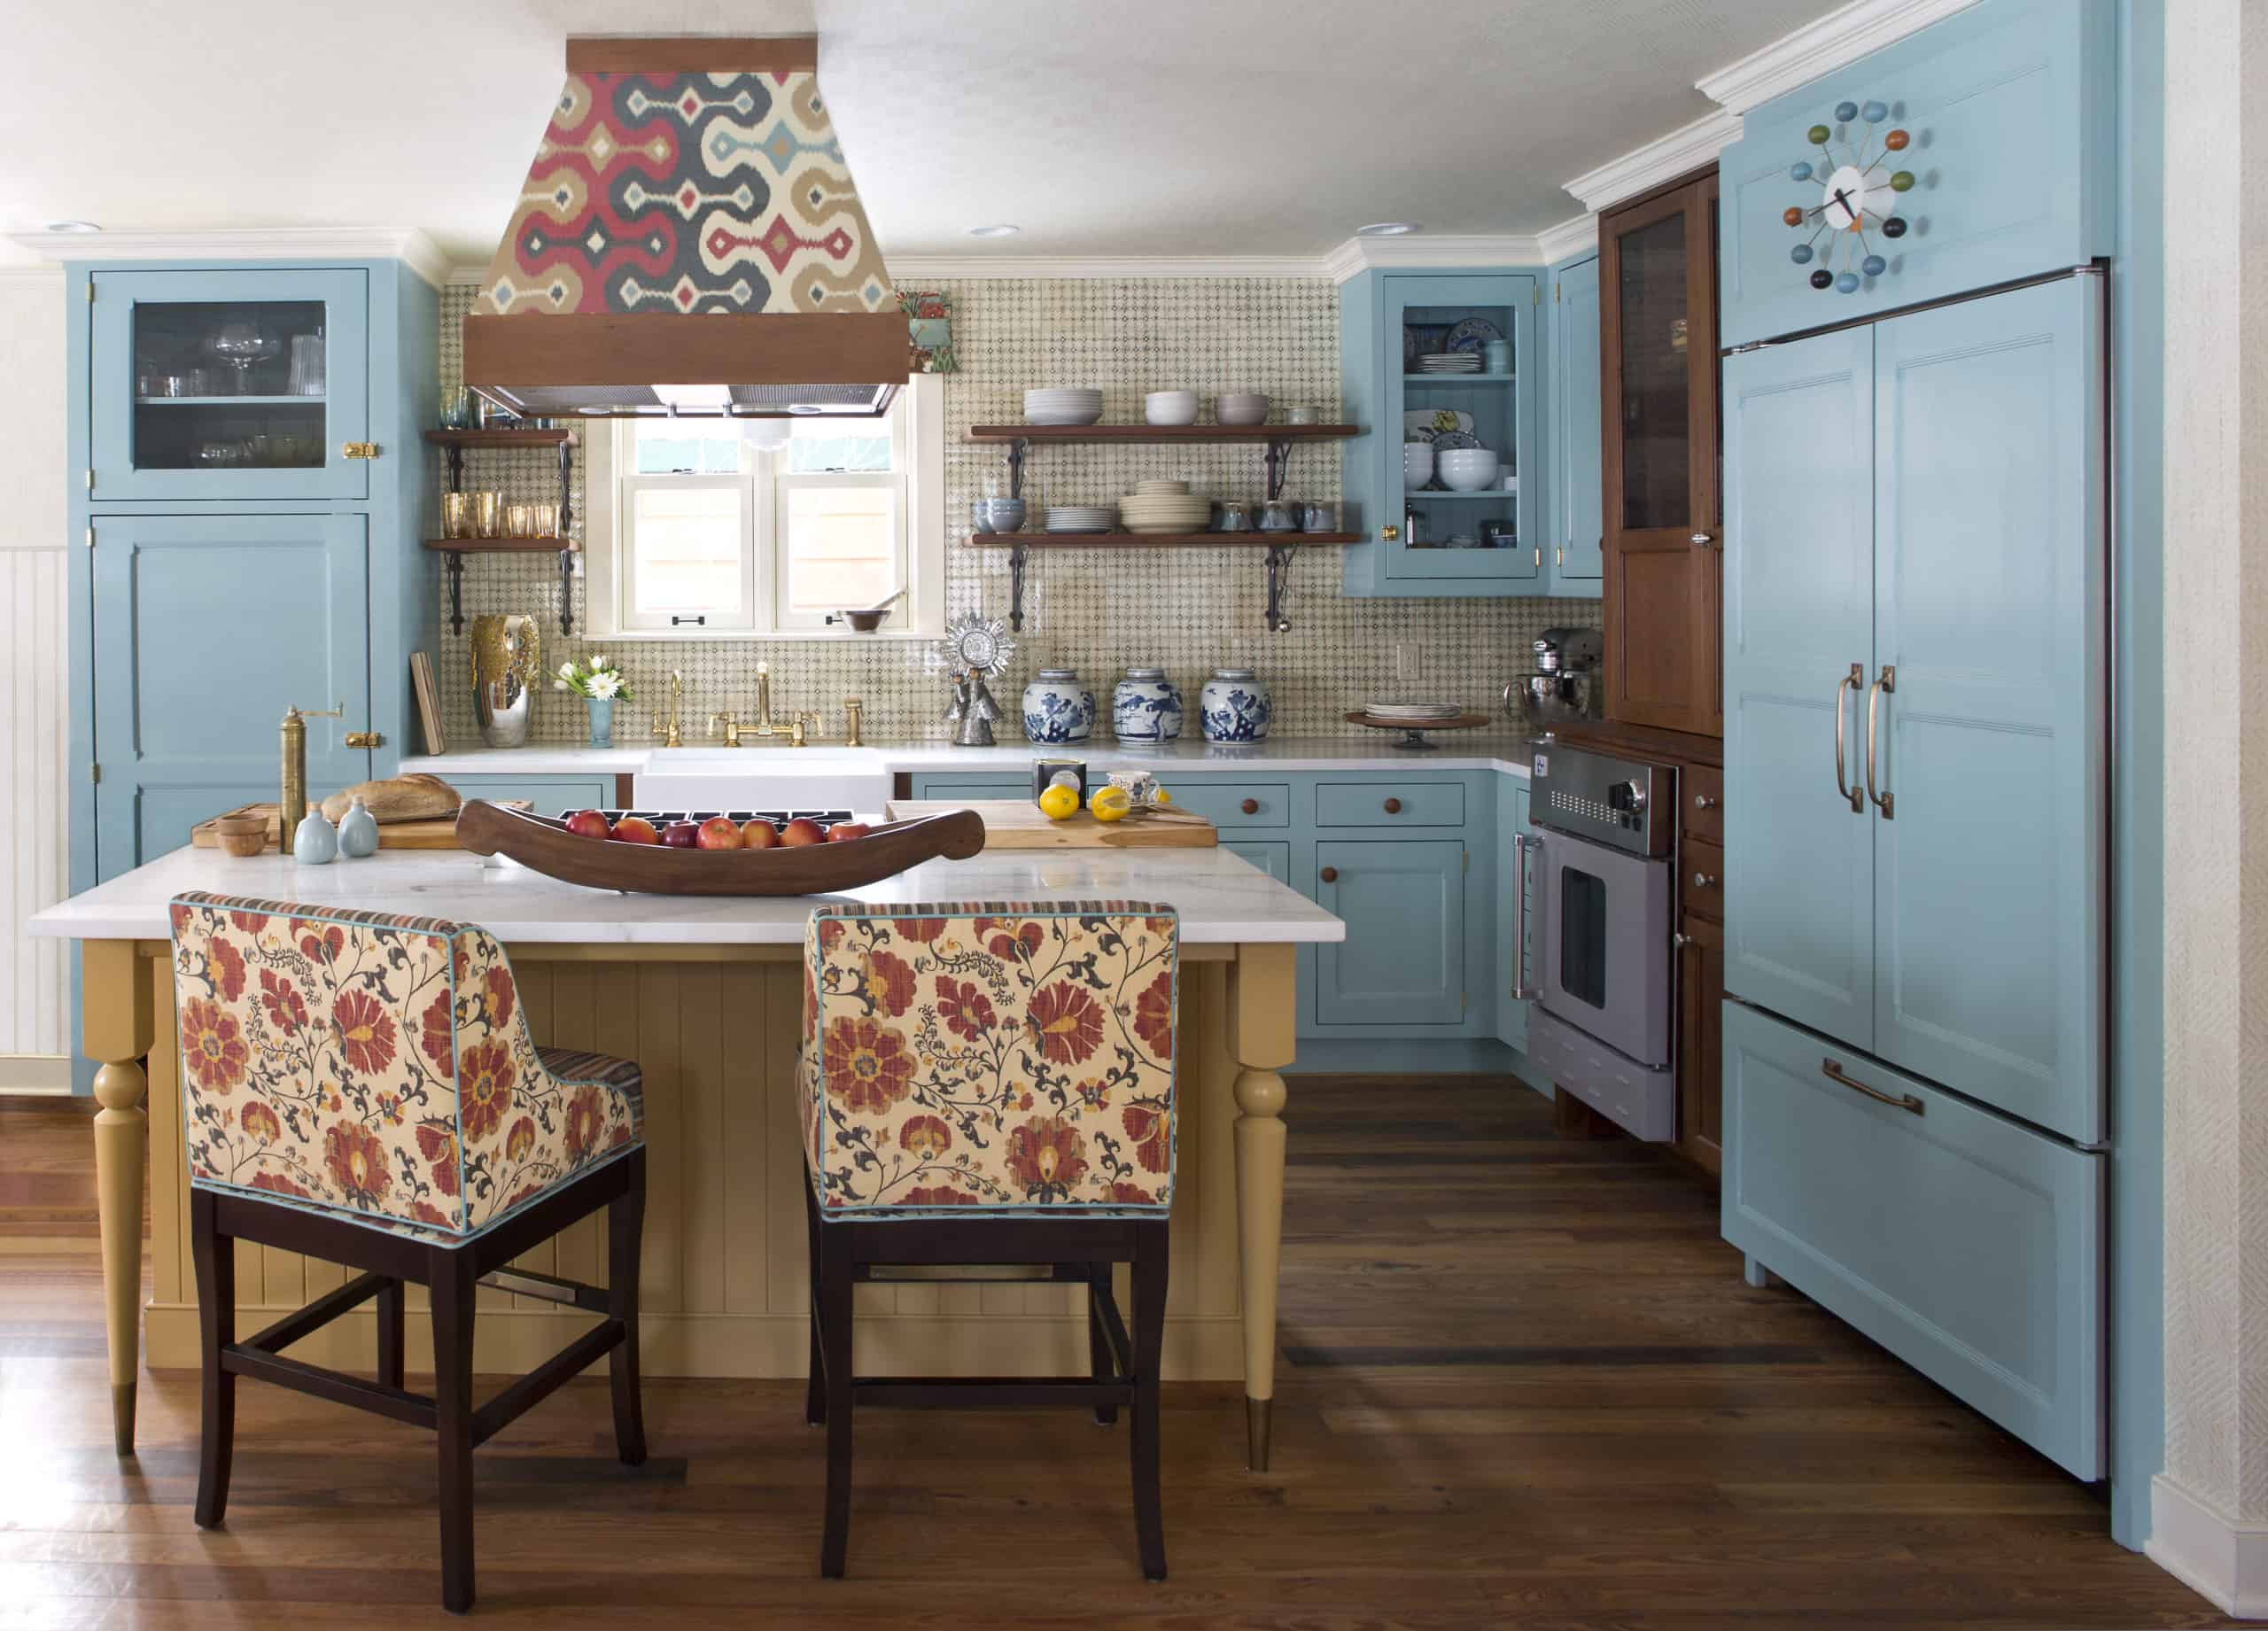 Colorful kitchen design with light turquoise blue cabinets